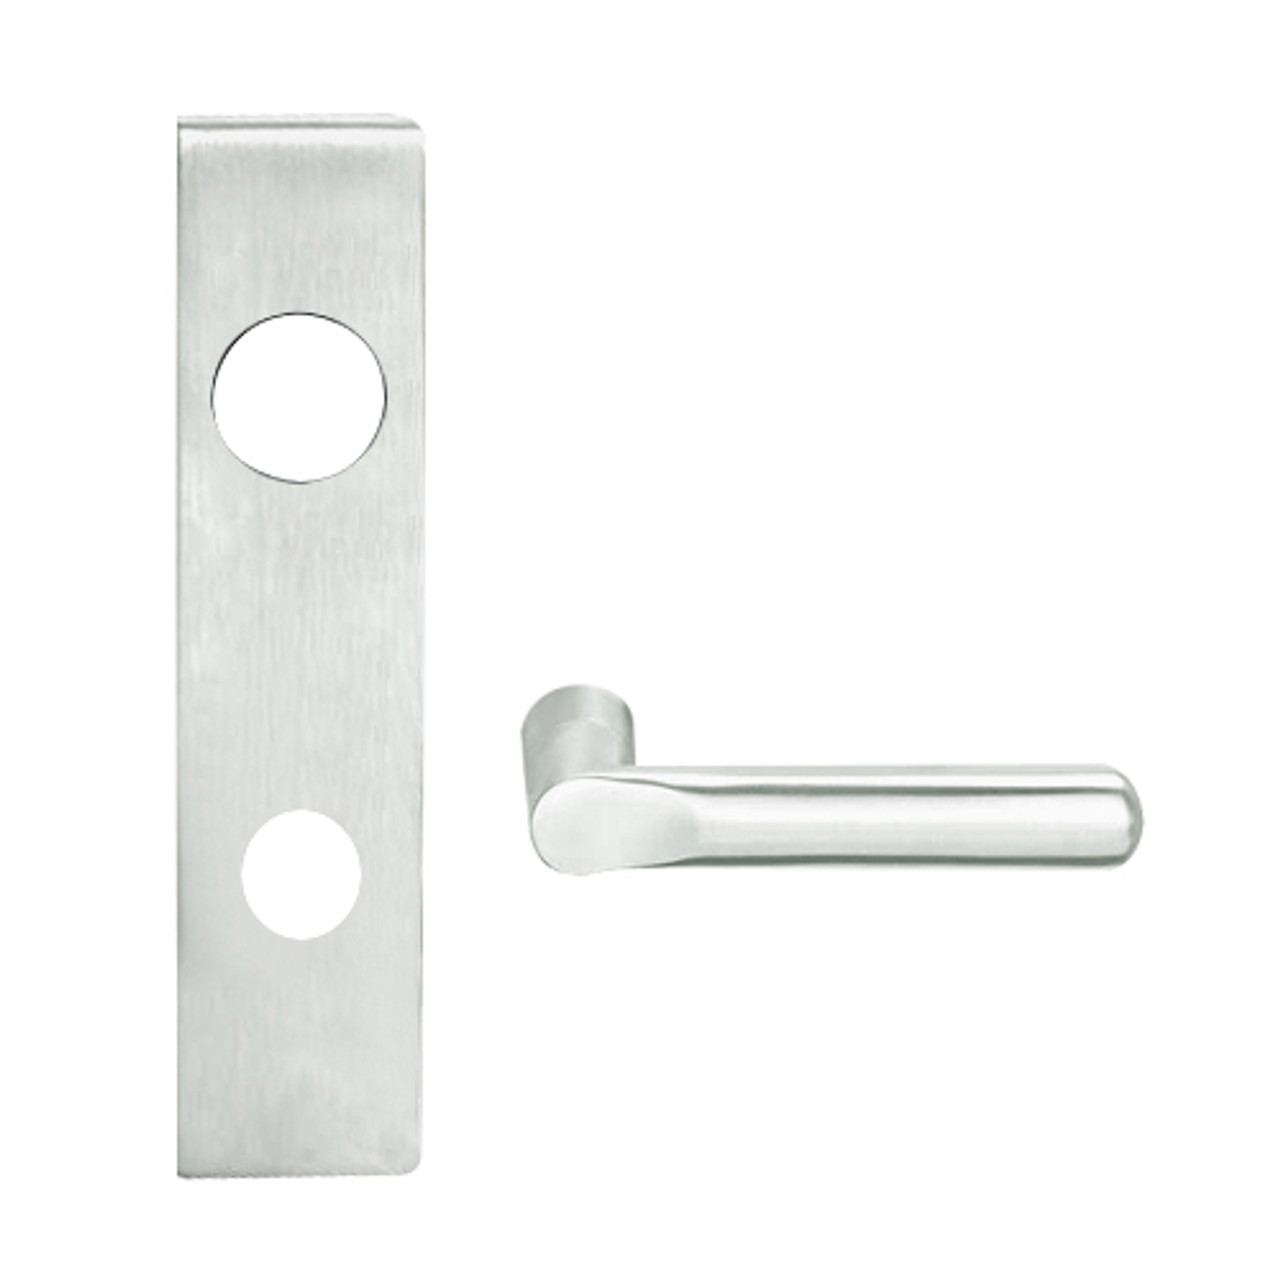 L9026J-18L-619 Schlage L Series Exit Lock with Cylinder Commercial Mortise Lock with 18 Cast Lever Design Prepped for FSIC in Satin Nickel